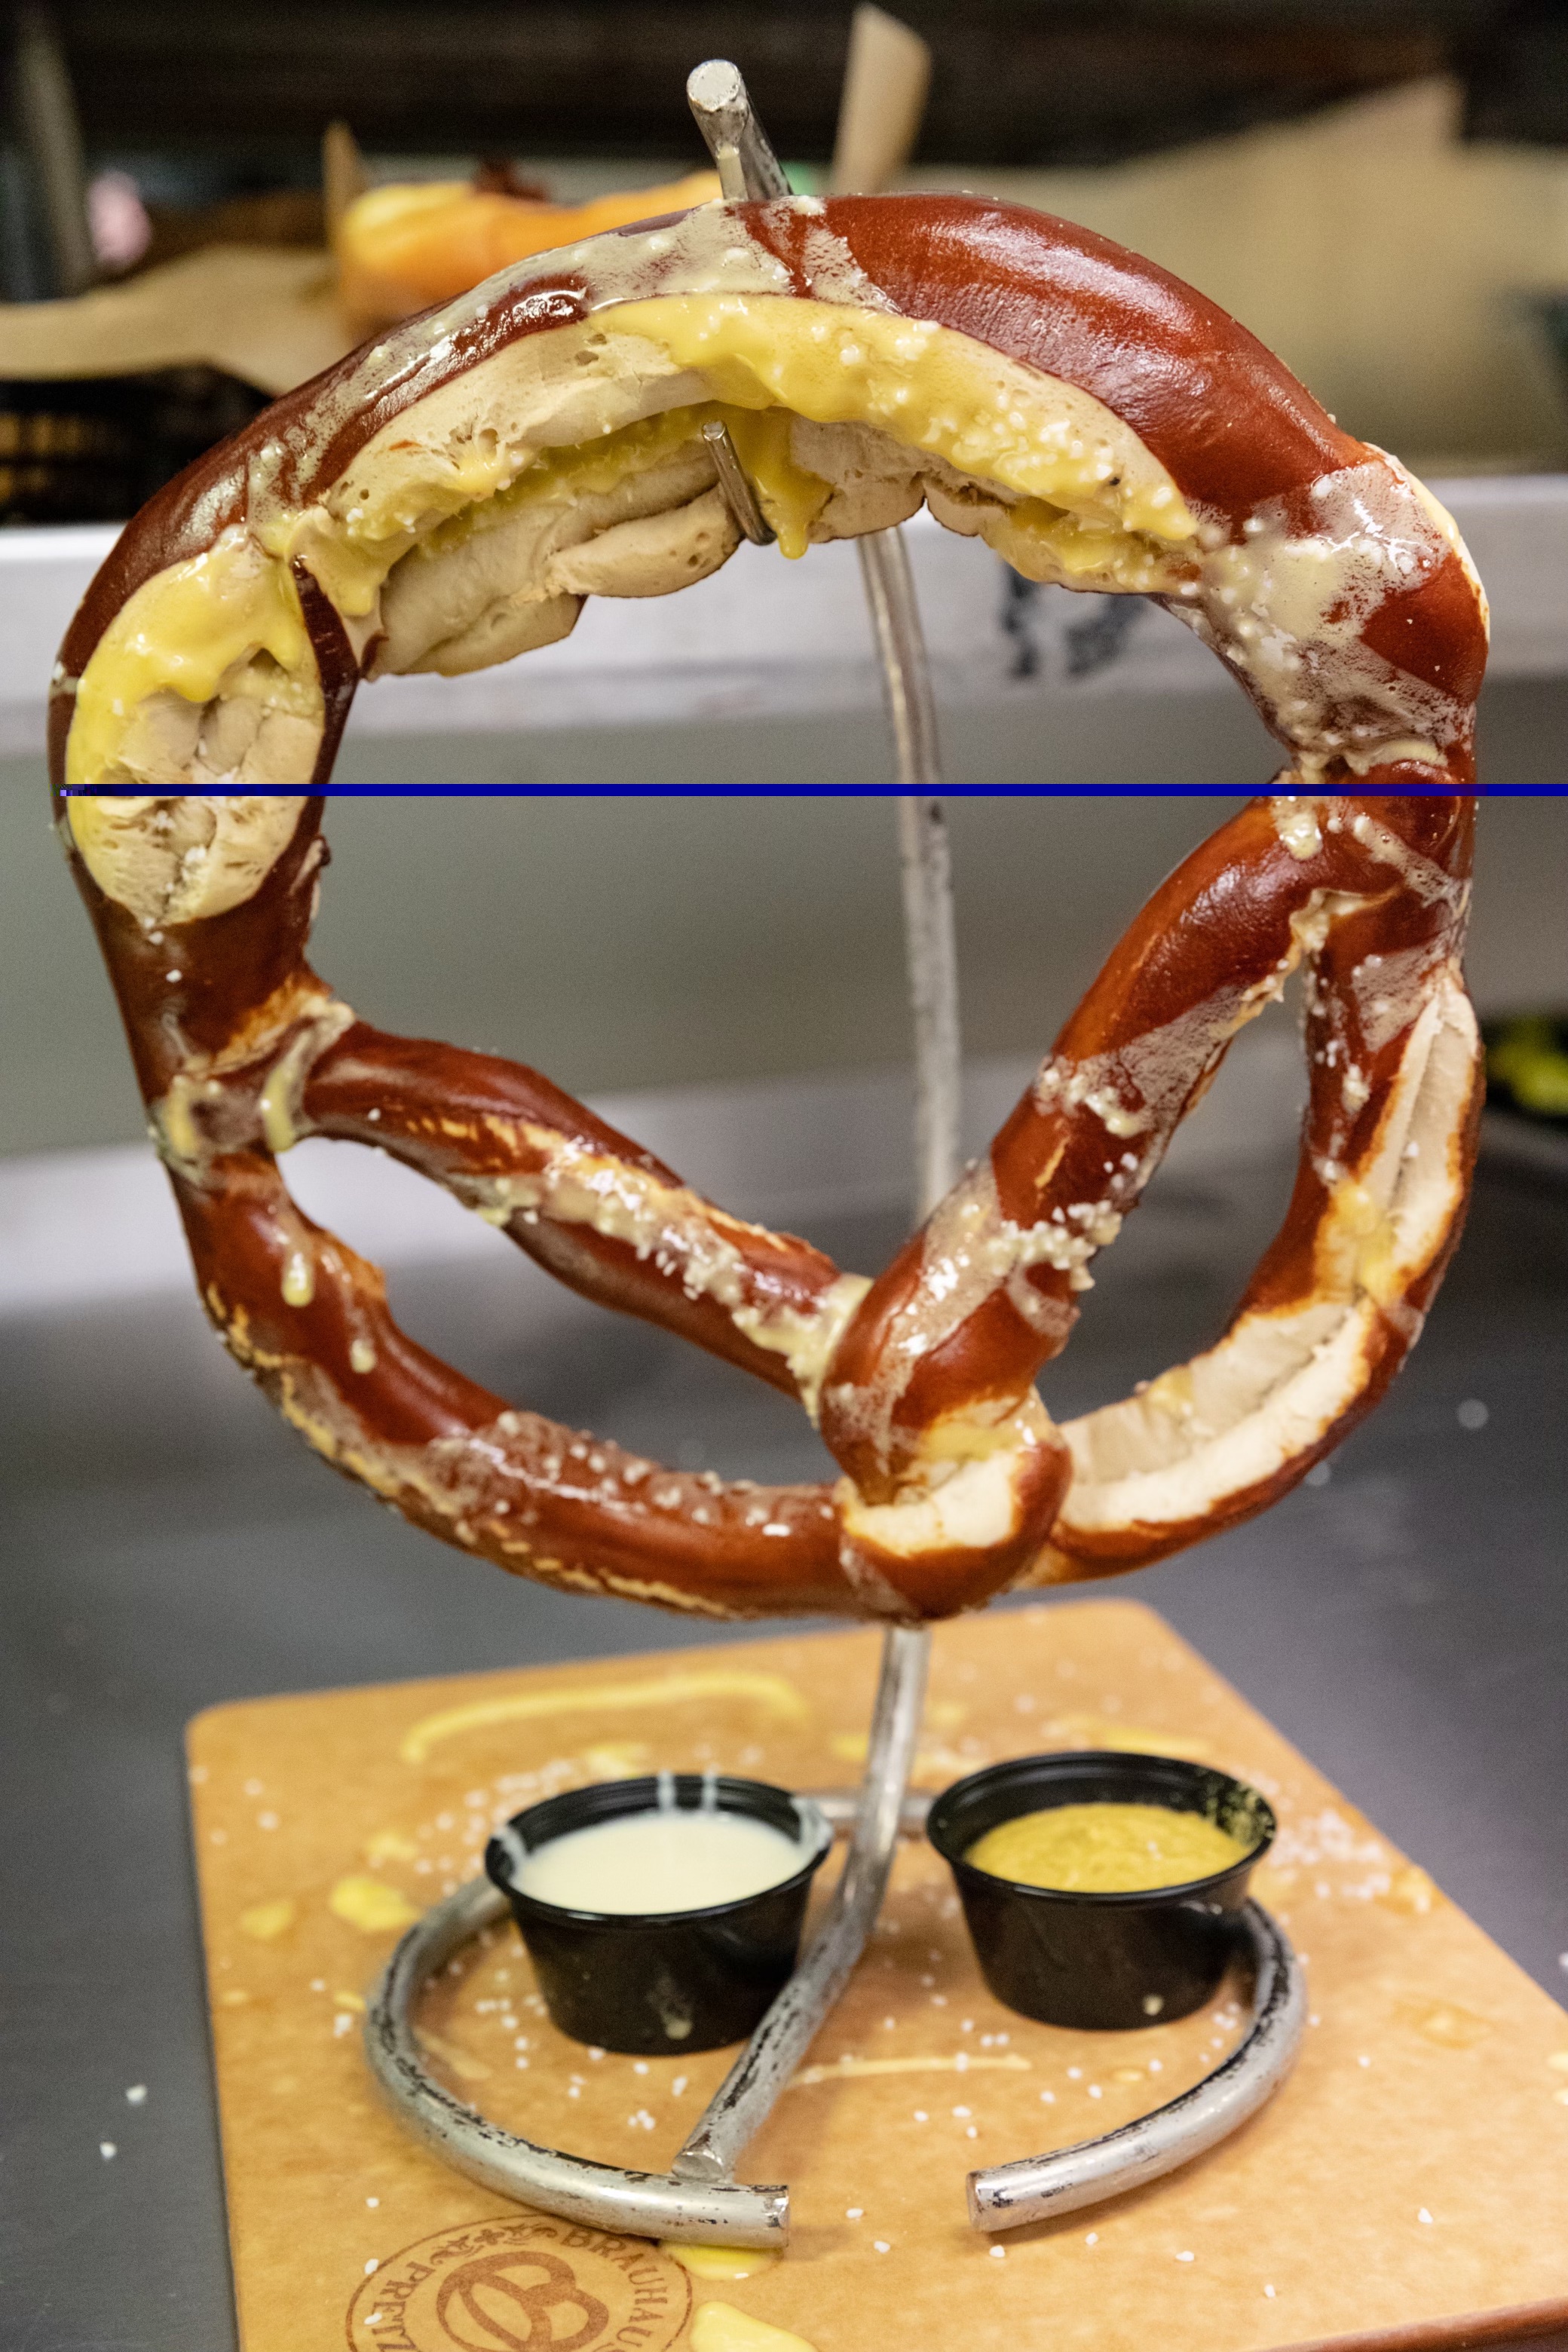 The jumbo pretzel served with queso and mustard at Gettin' Basted in Nixa.